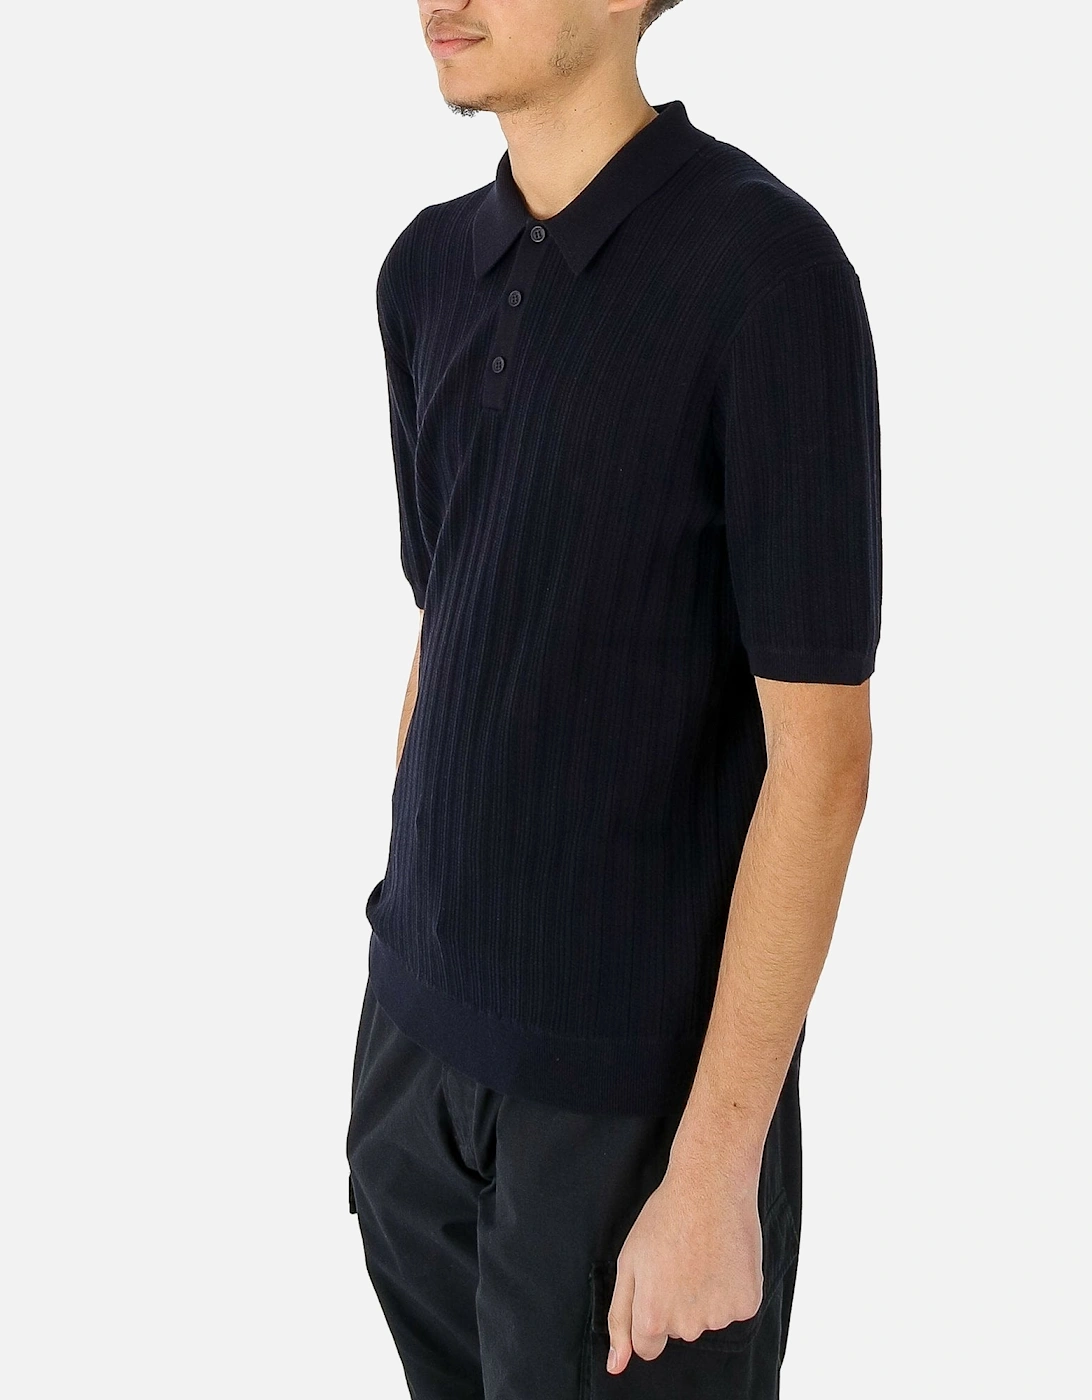 Naples Vertical Textured Navy Knitted Polo